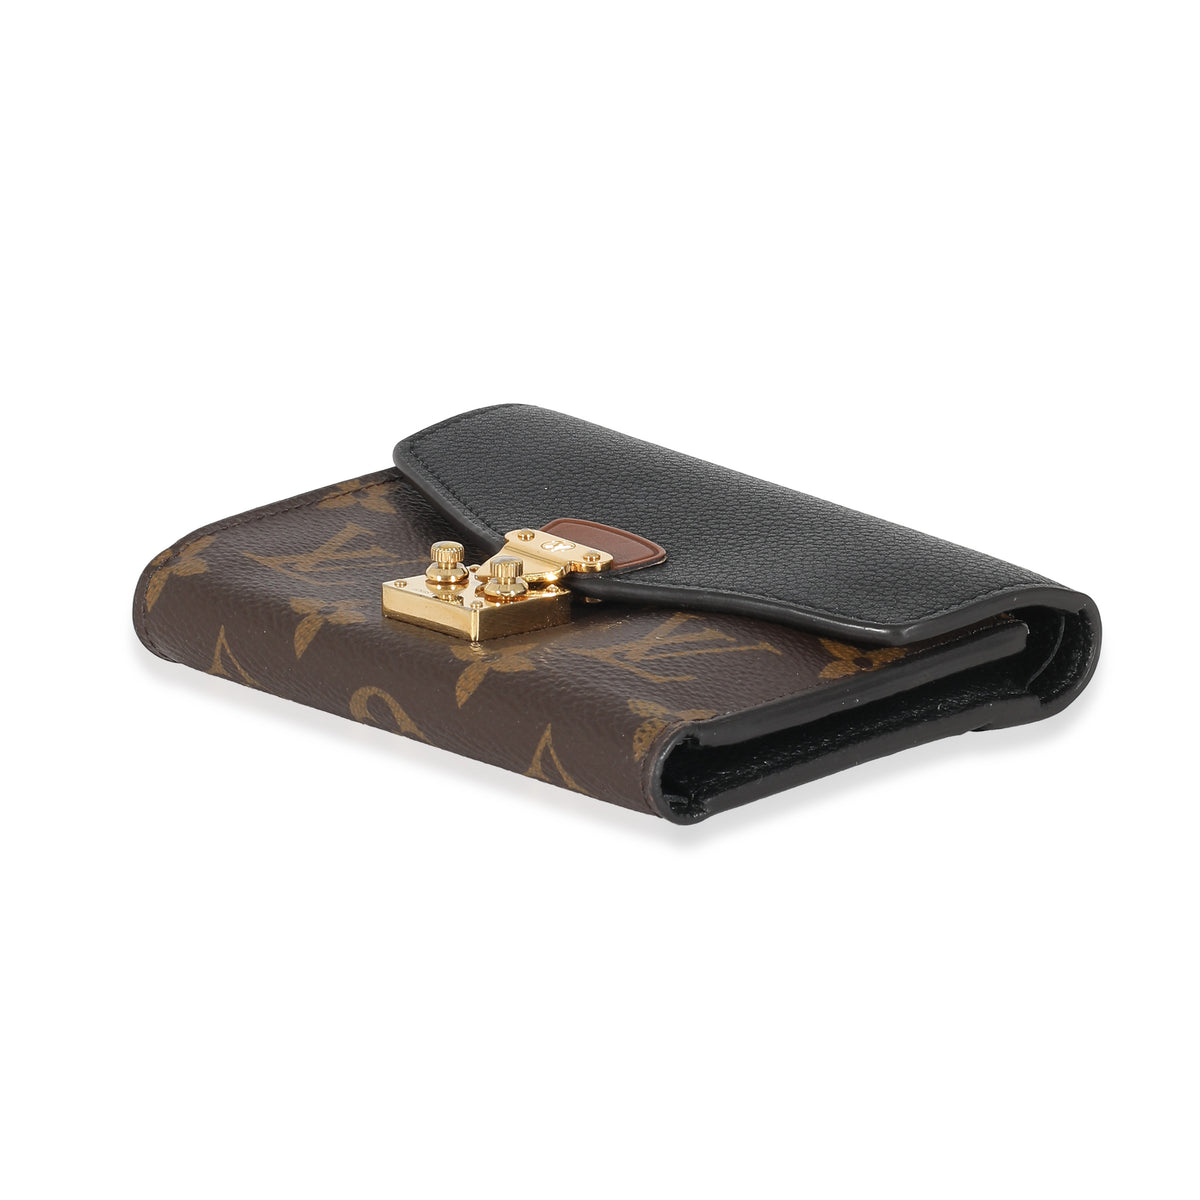 Louis Vuitton Pallas Compact Wallet, Small Leather Goods